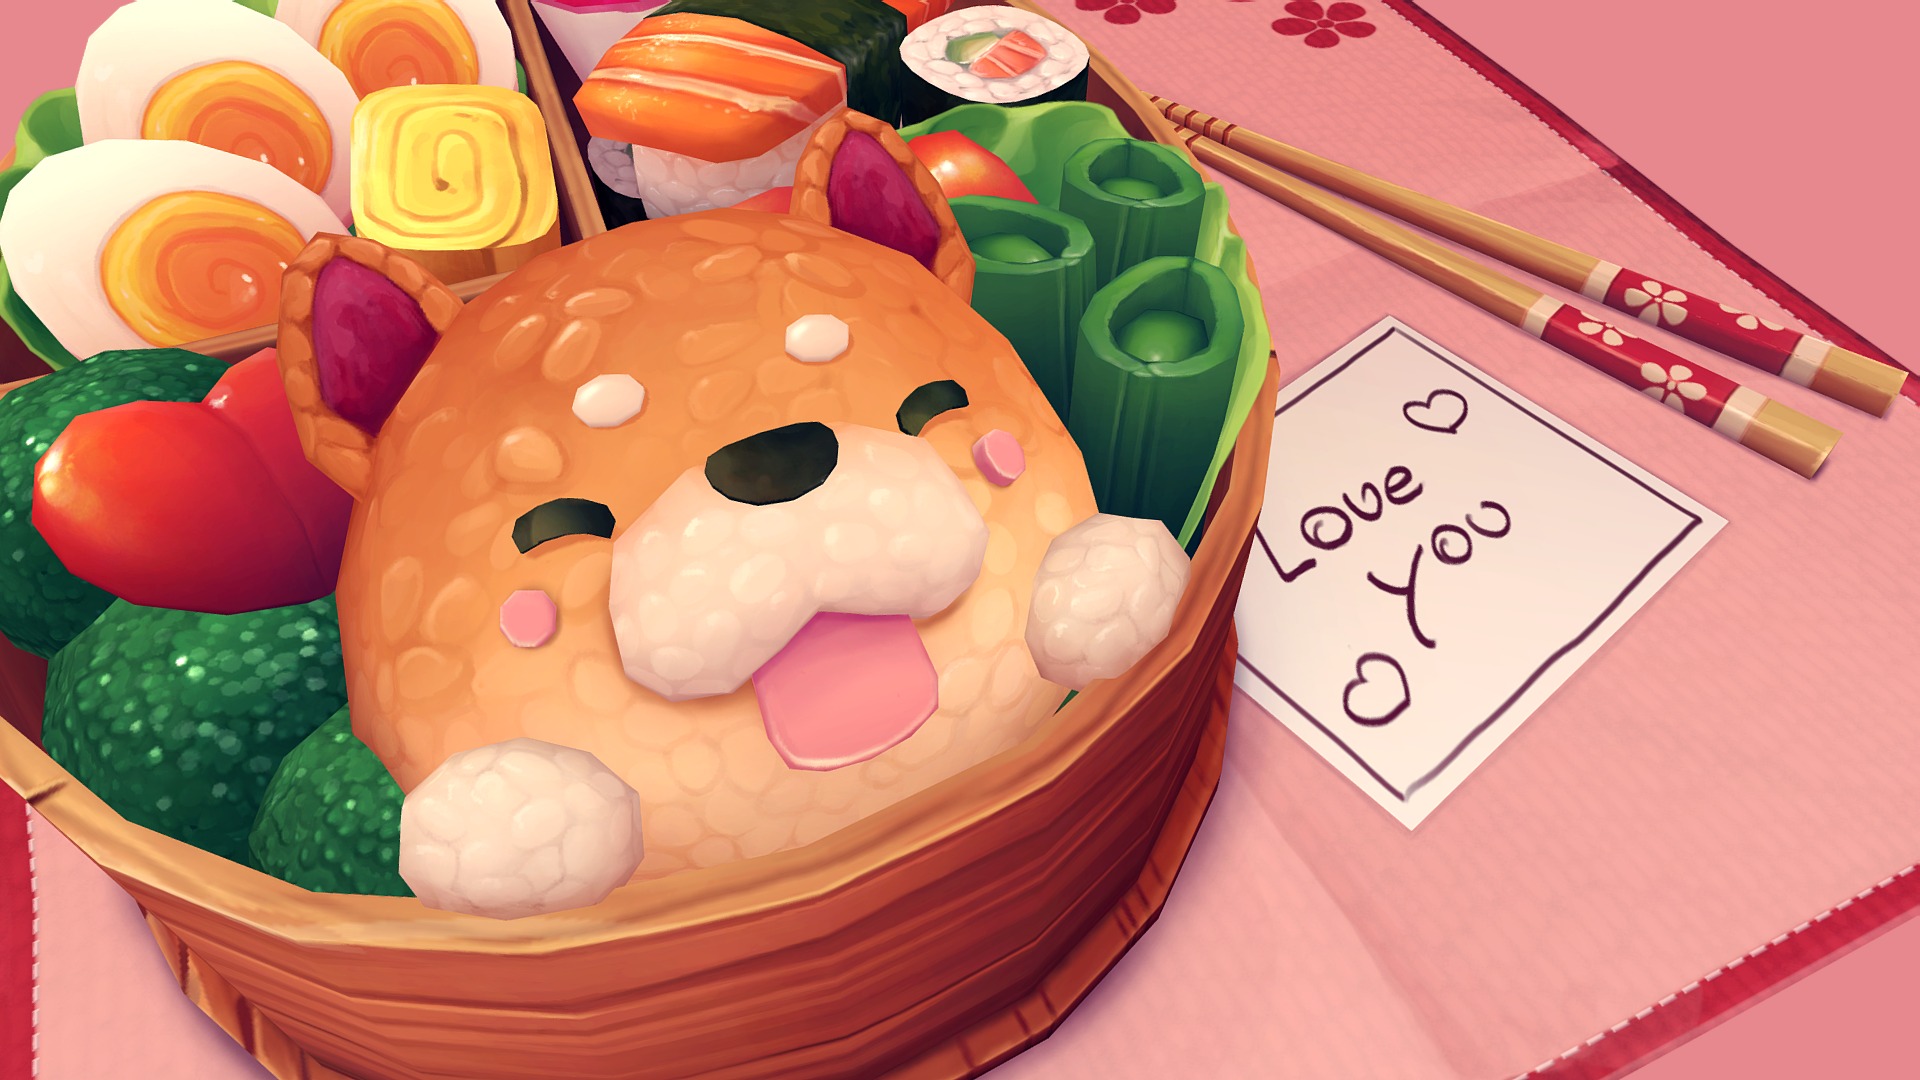 i was inspired by my sweetheart to make this little handpainted scene. Texturing all of this food was something different from what i'm used to but was really fun and i'm excited to share this delicious bento with you :D 
(concept by me) - Bento for my sweetheart - 3D model by blueberry.stars (@dennys.verrino) 3d model